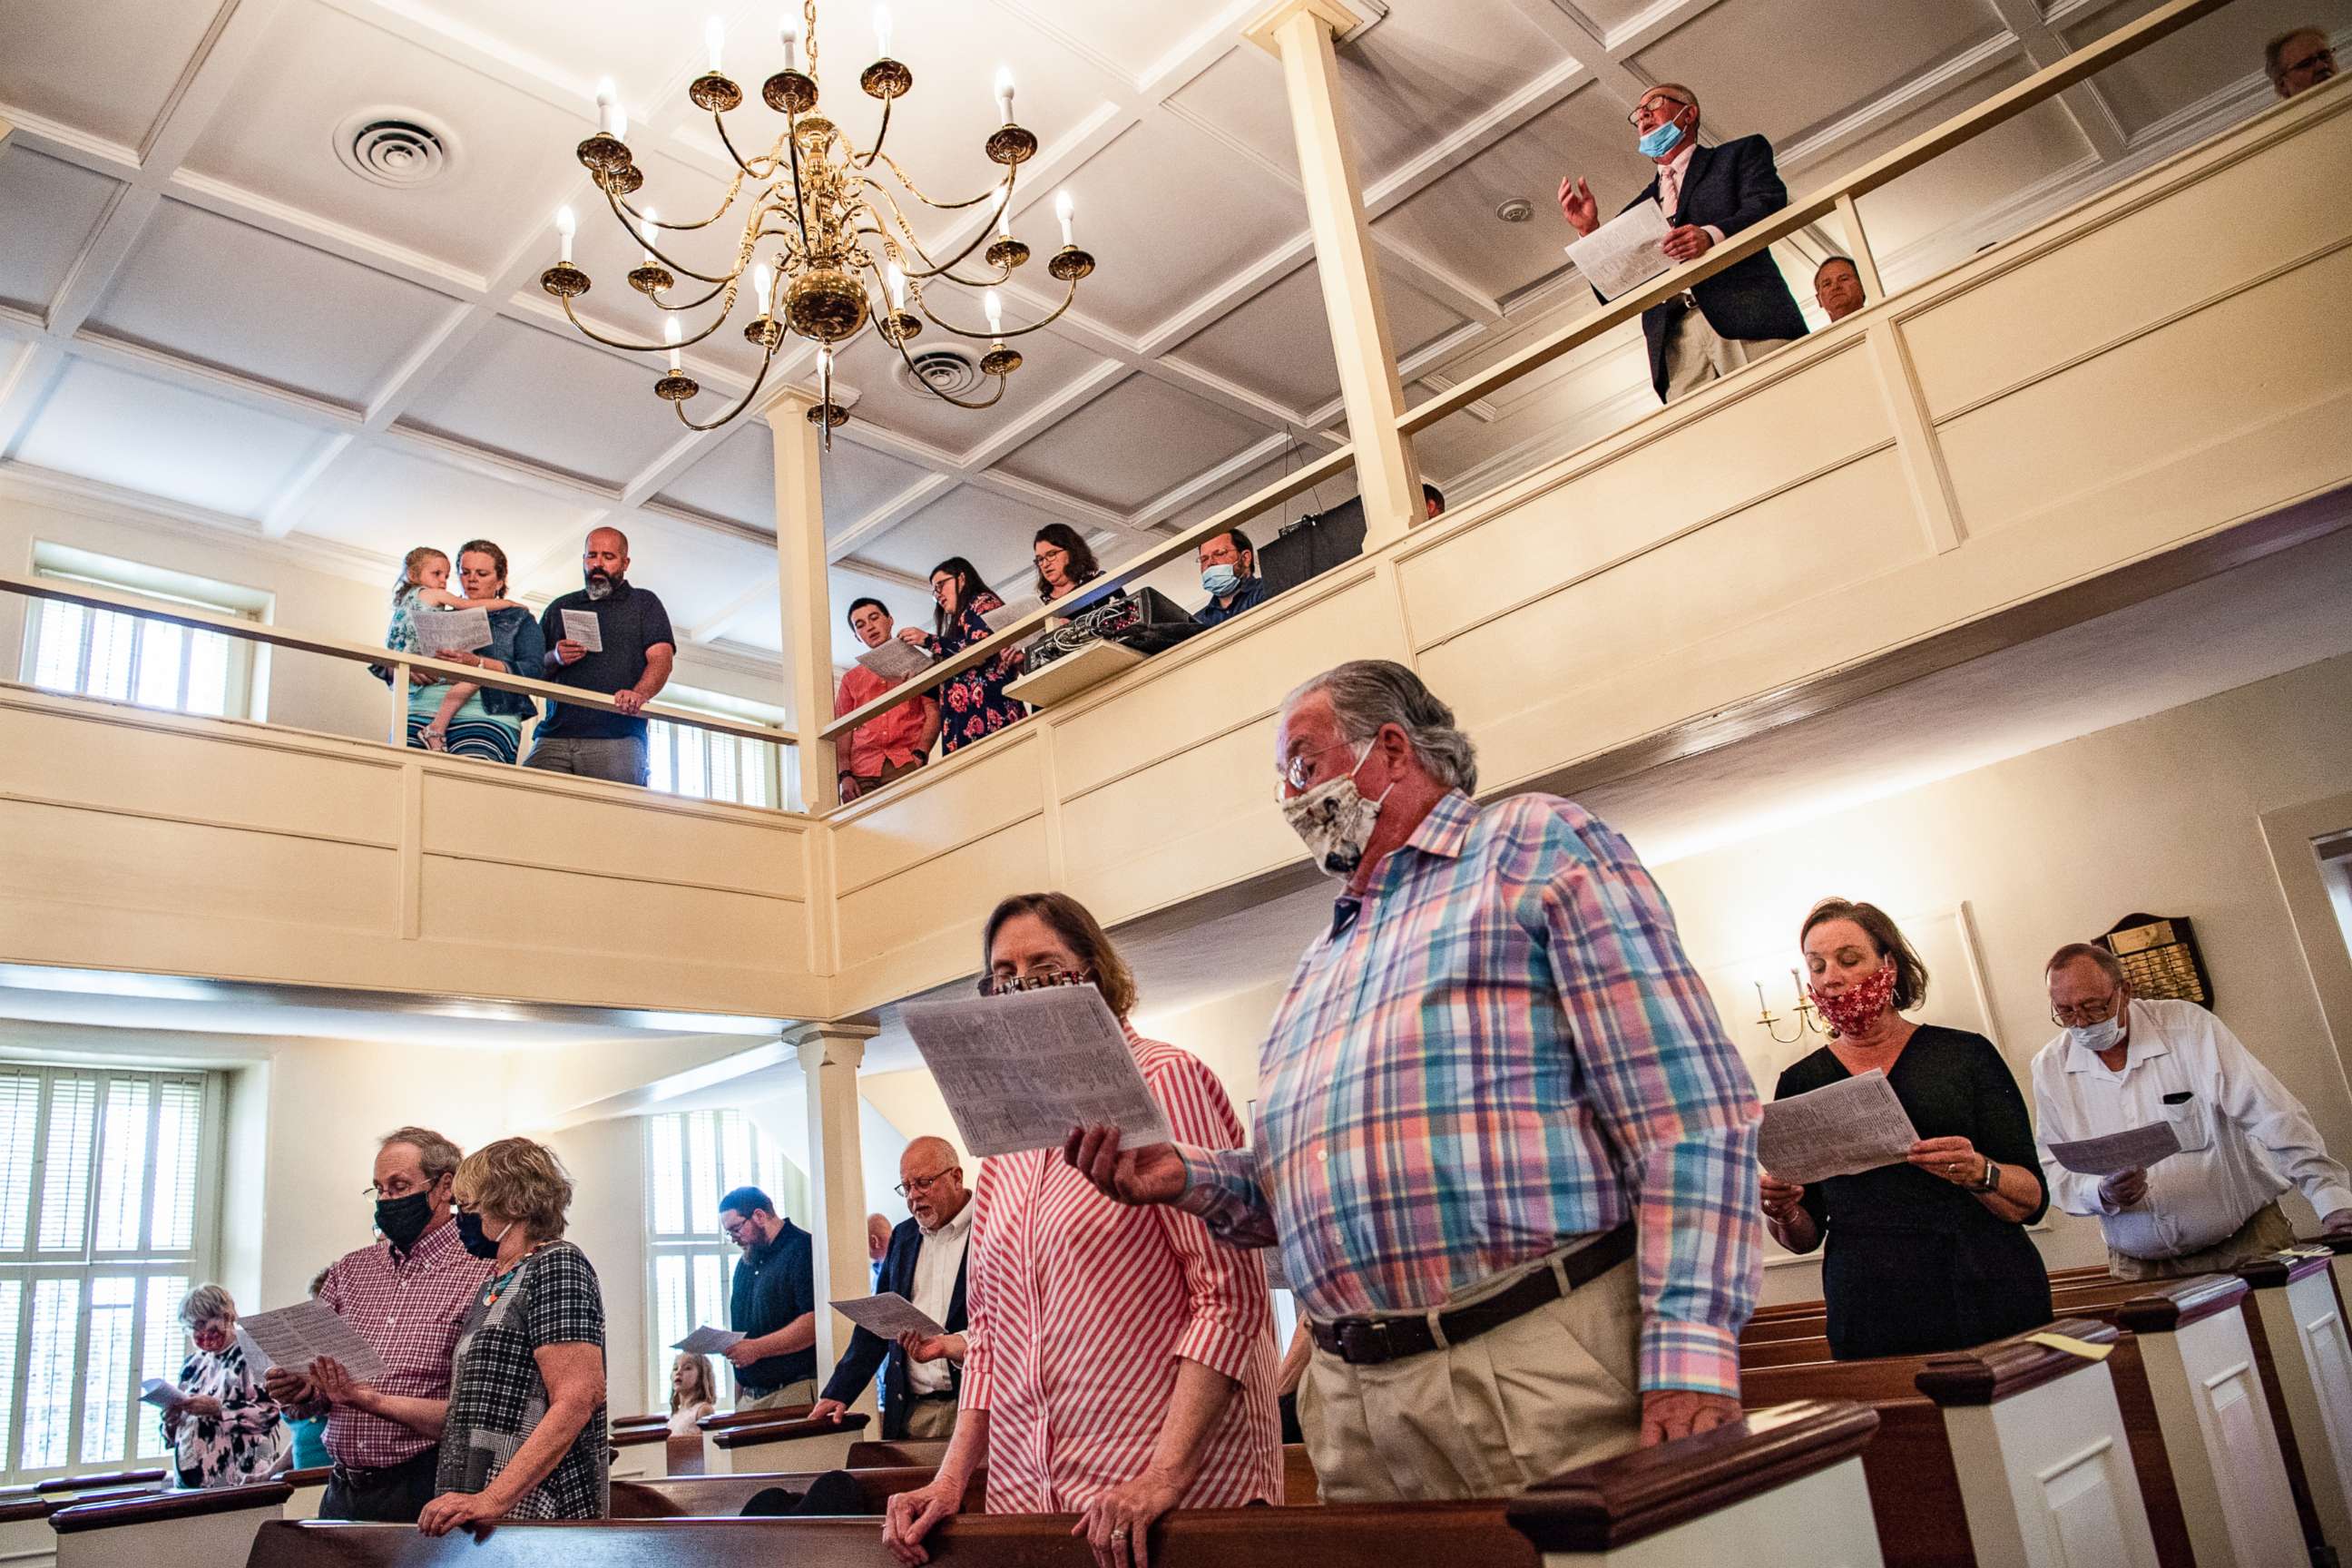 PHOTO: Worshipers wearing masks and practicing social distancing are seeing during service at Hopeful Baptist Church on Sunday, May 17, 2020, in Montpelier, VA.